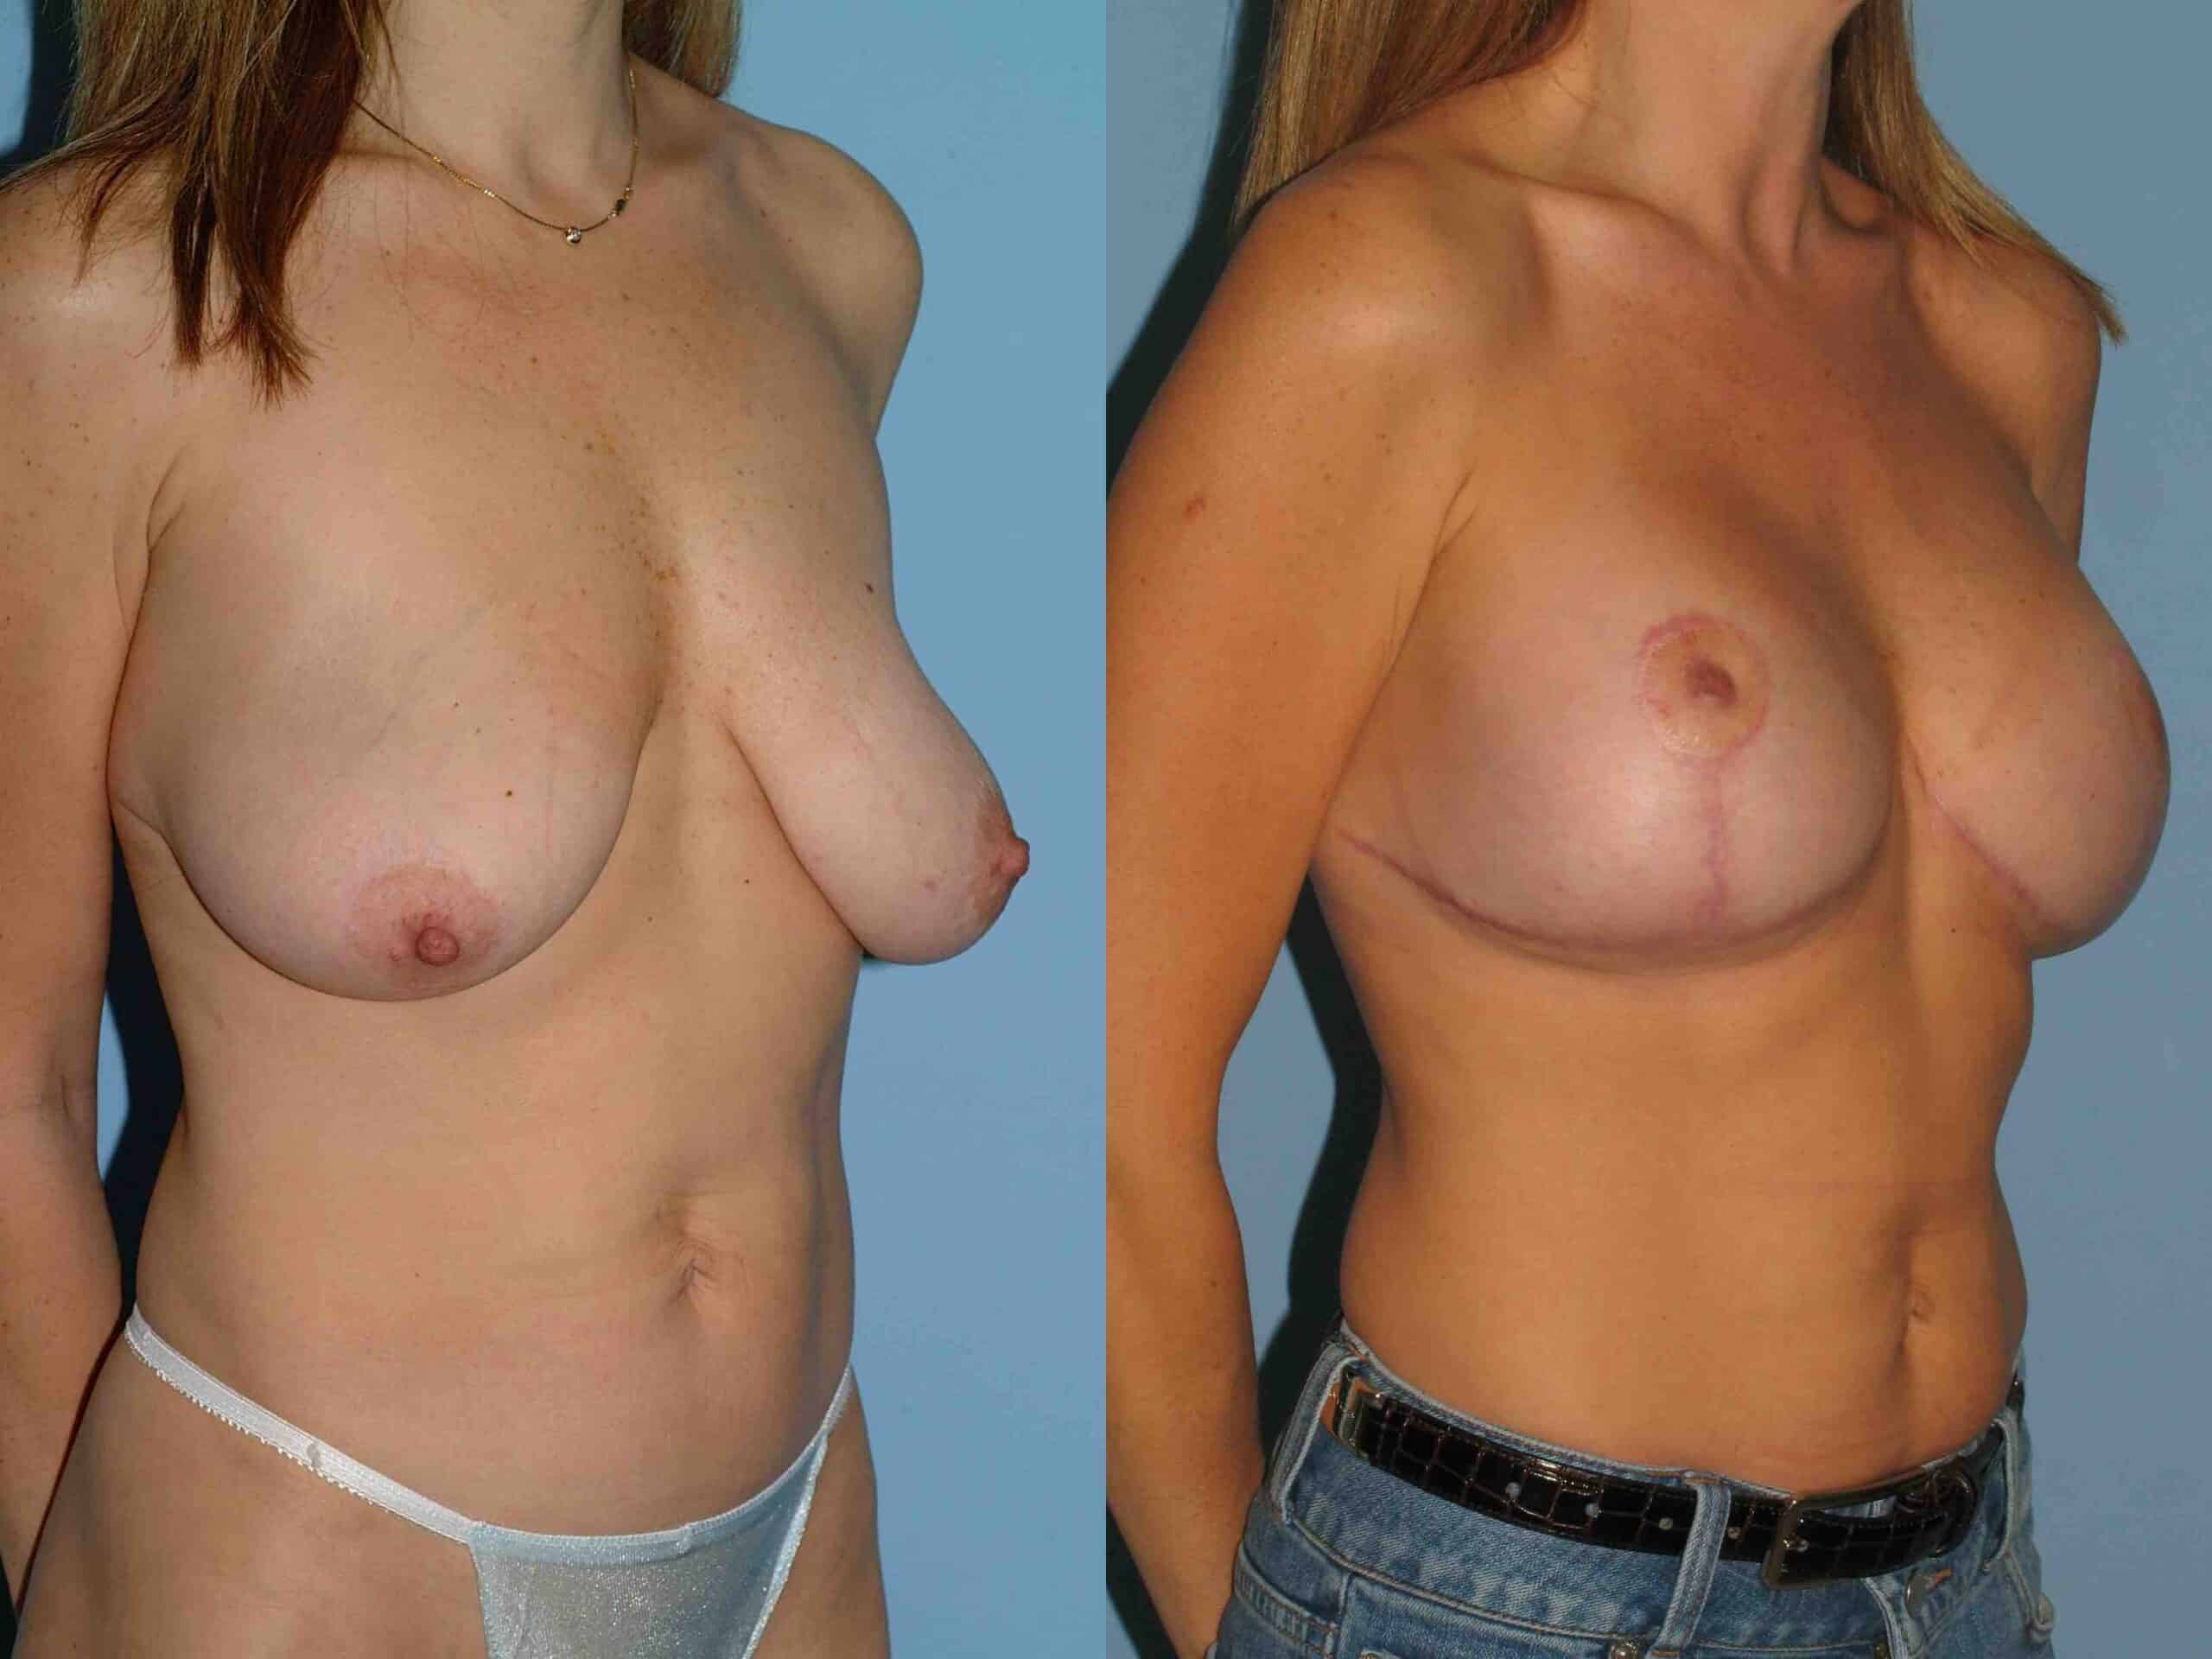 Before and after, patient 10 mo post op from Breast Augmentation, Mastopexy/Breast Lift procedures performed by Dr. Paul Vanek